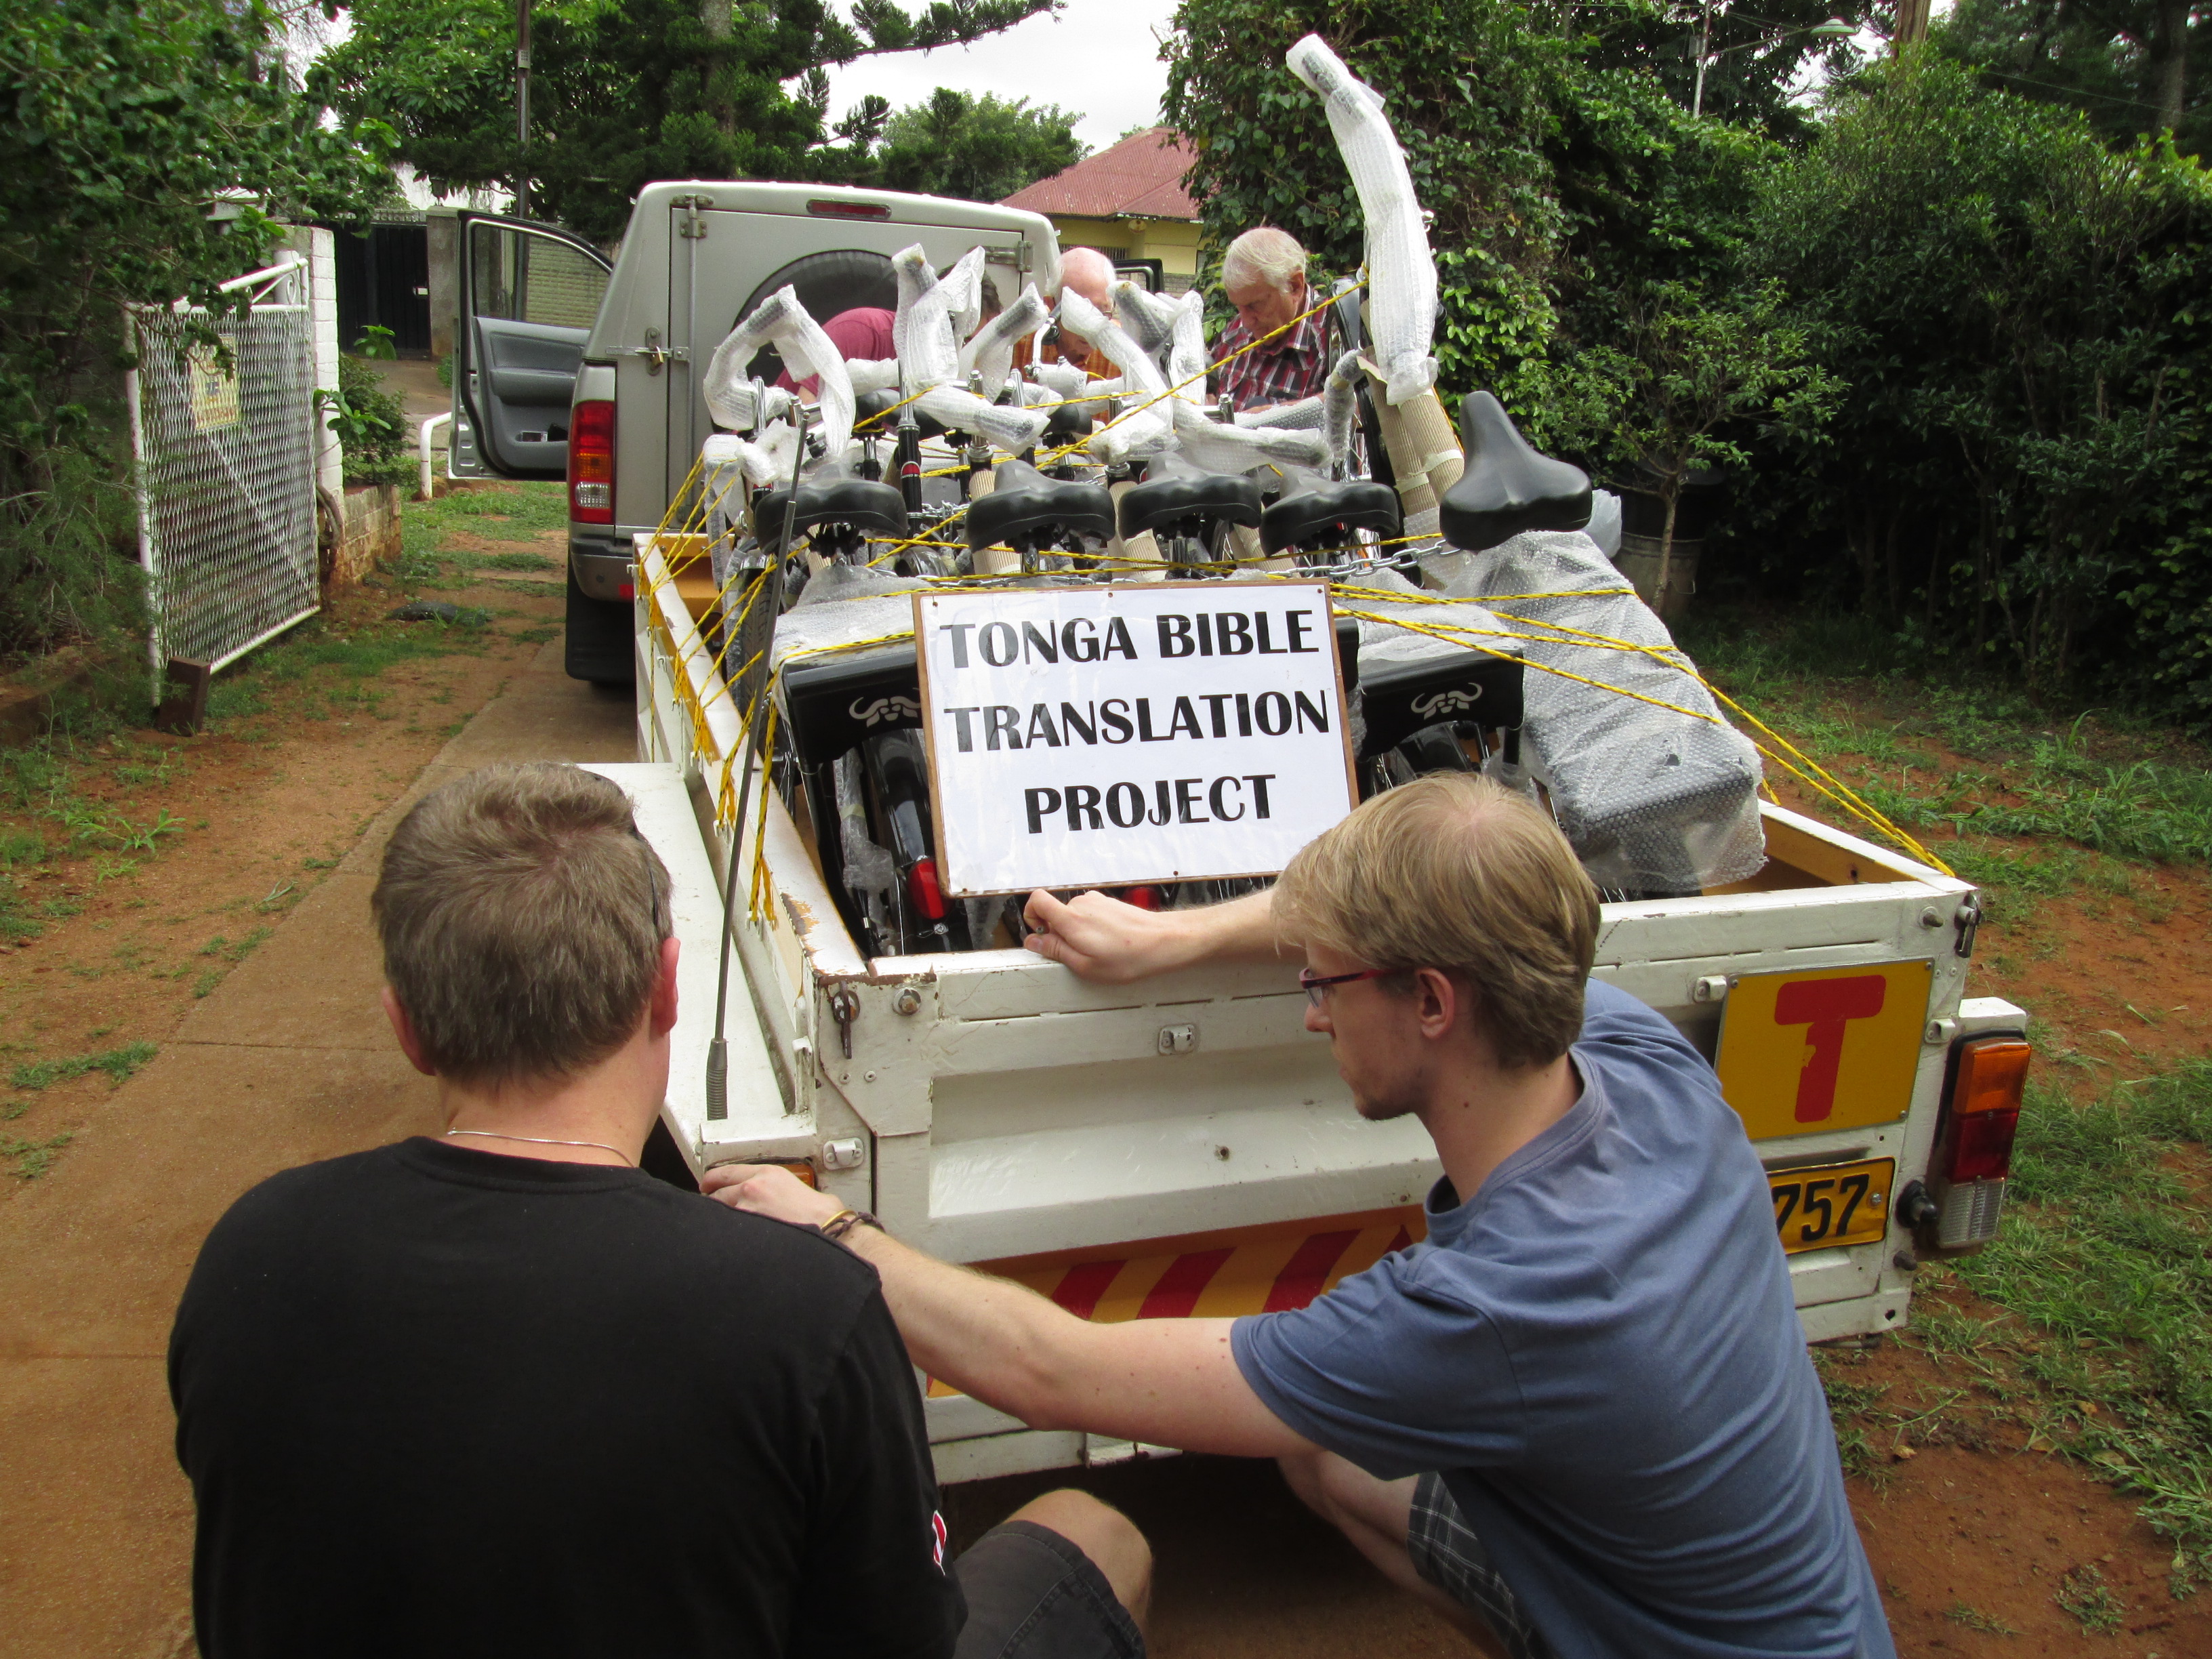 Loading up of bicycles to take to the Tonga Bible Translation team